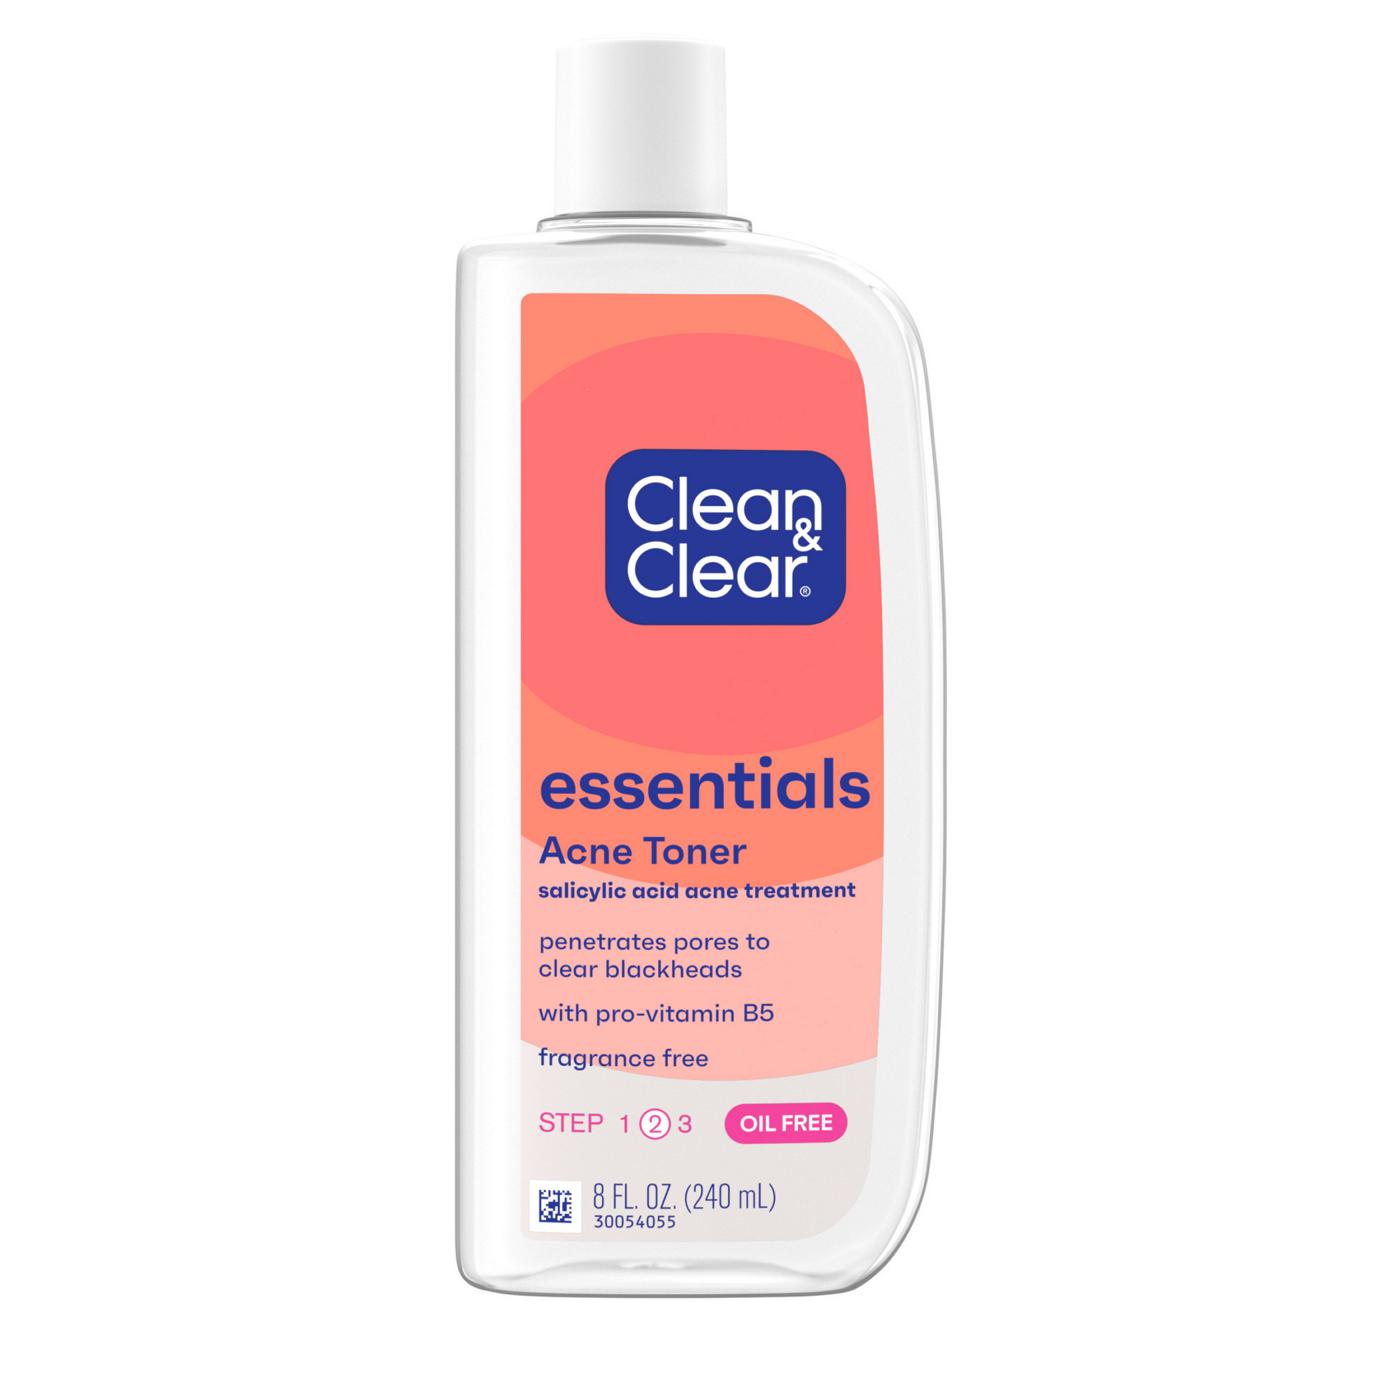 Clean & Clear Essentials Acne Toner; image 1 of 5